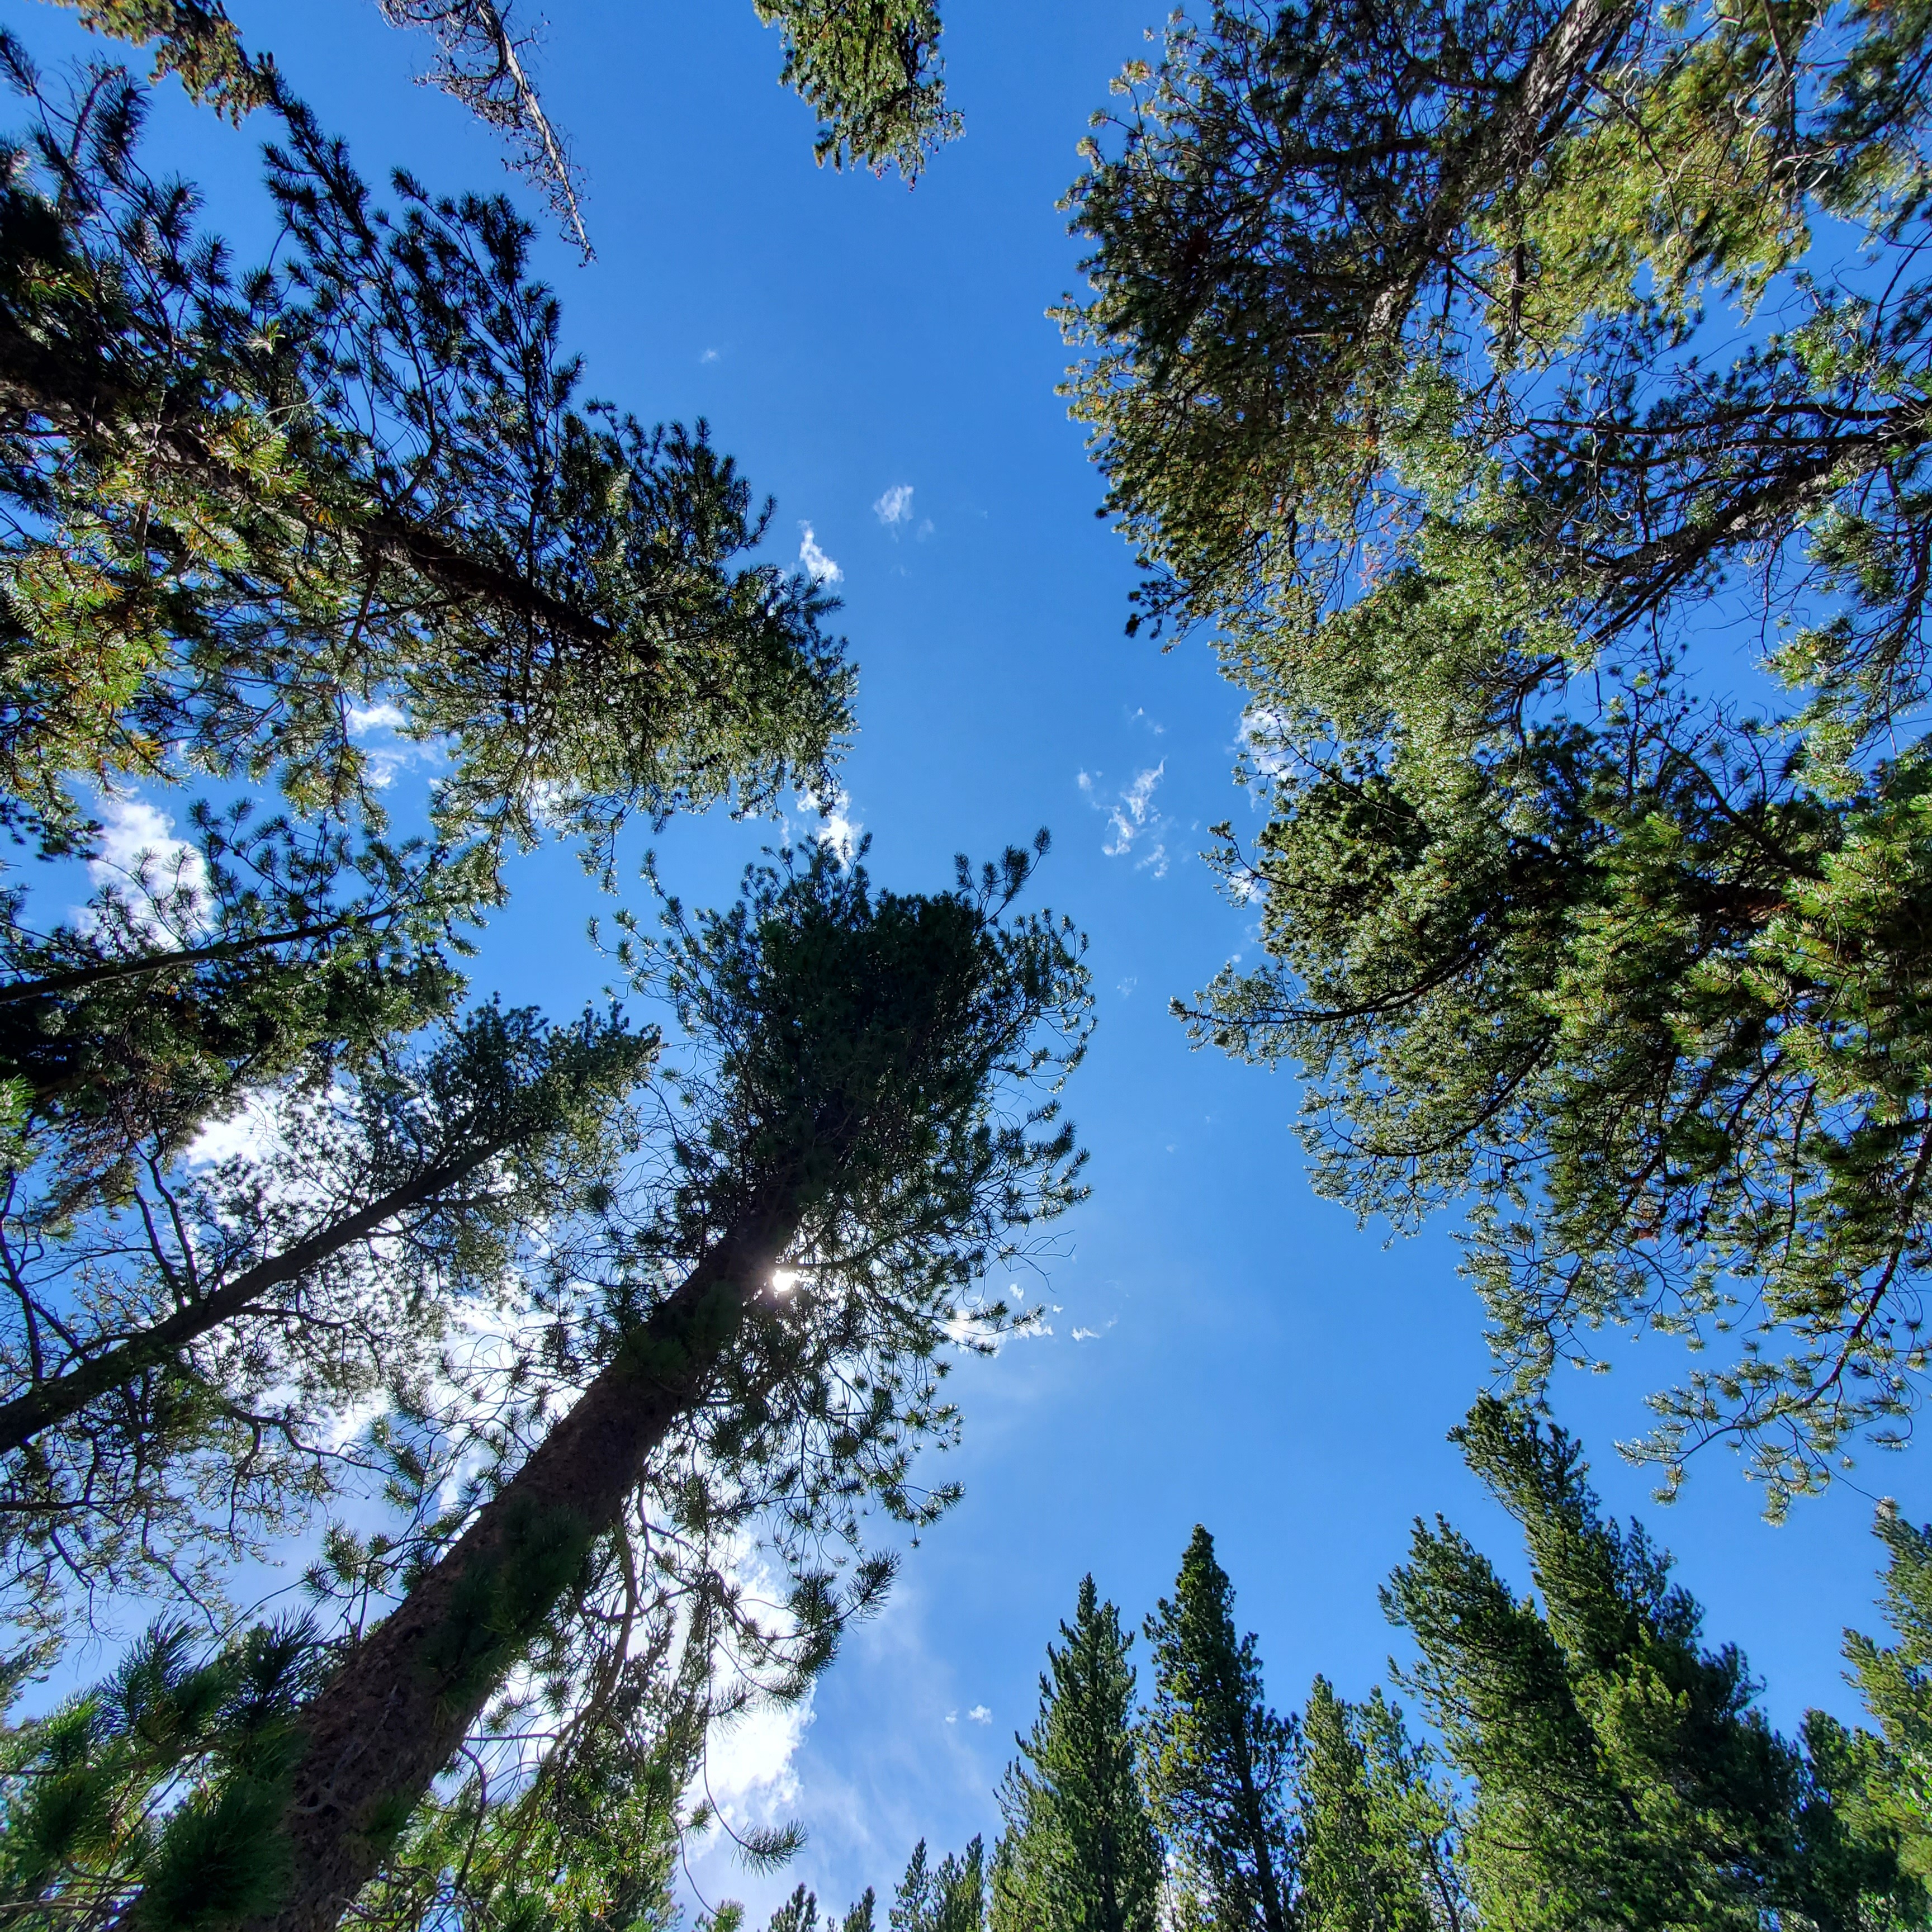 Looking up through pine trees to blue sky.